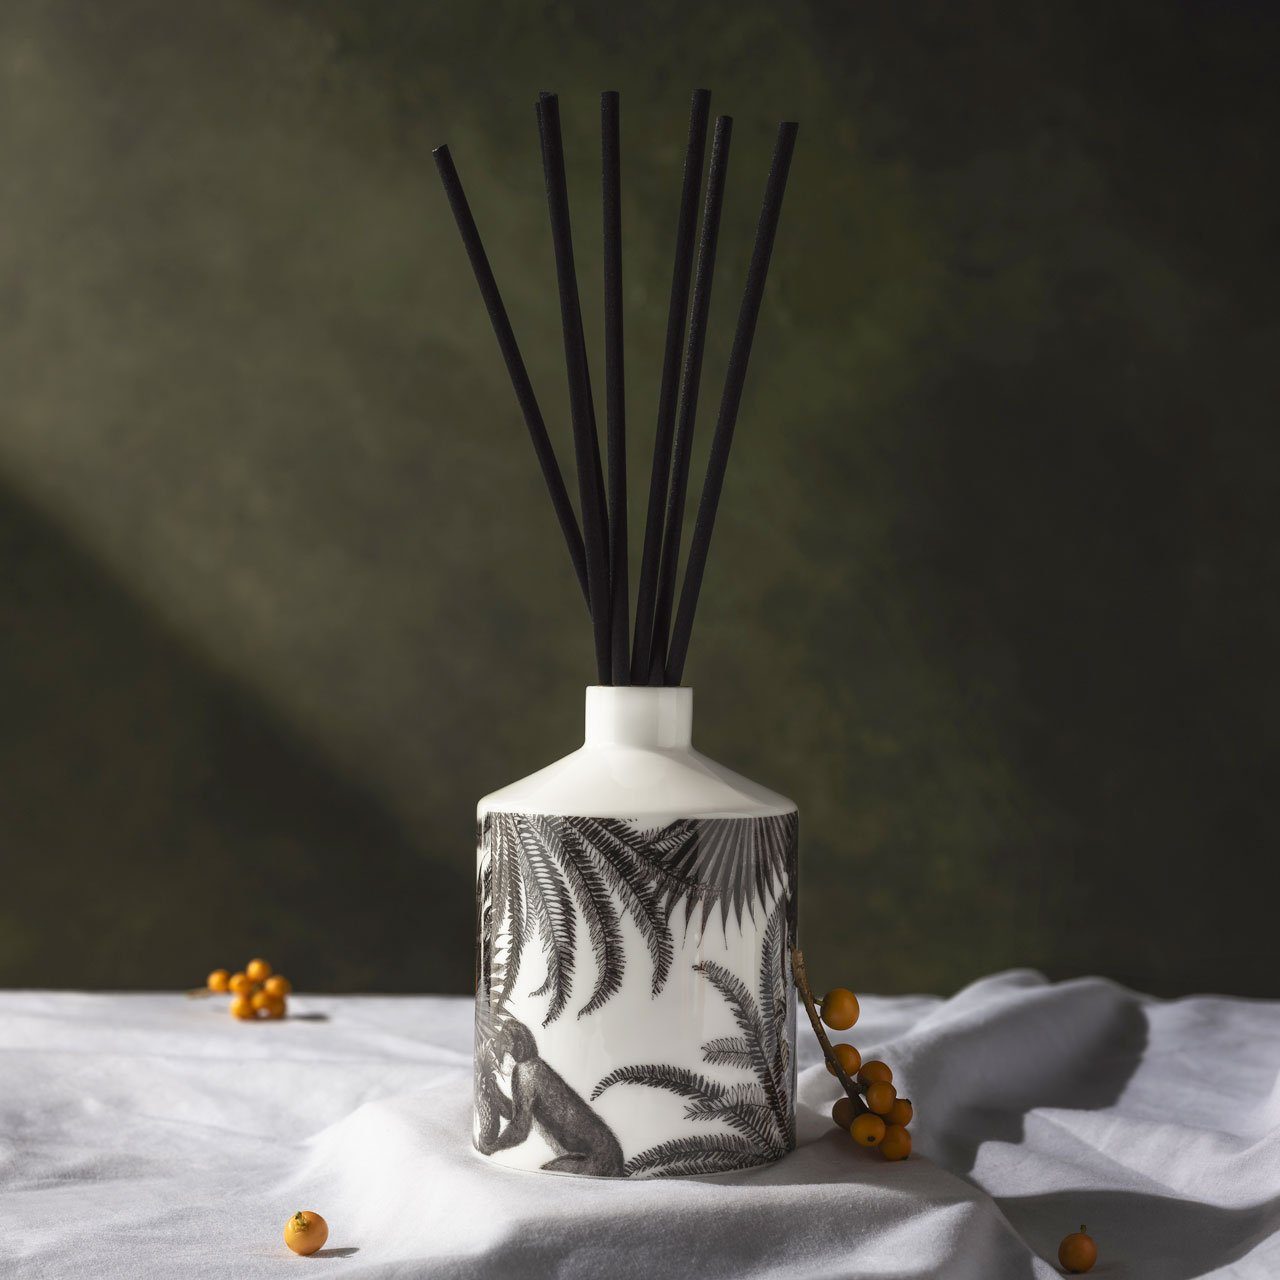 The Tropical Paradise Ceramic Reed Diffuser